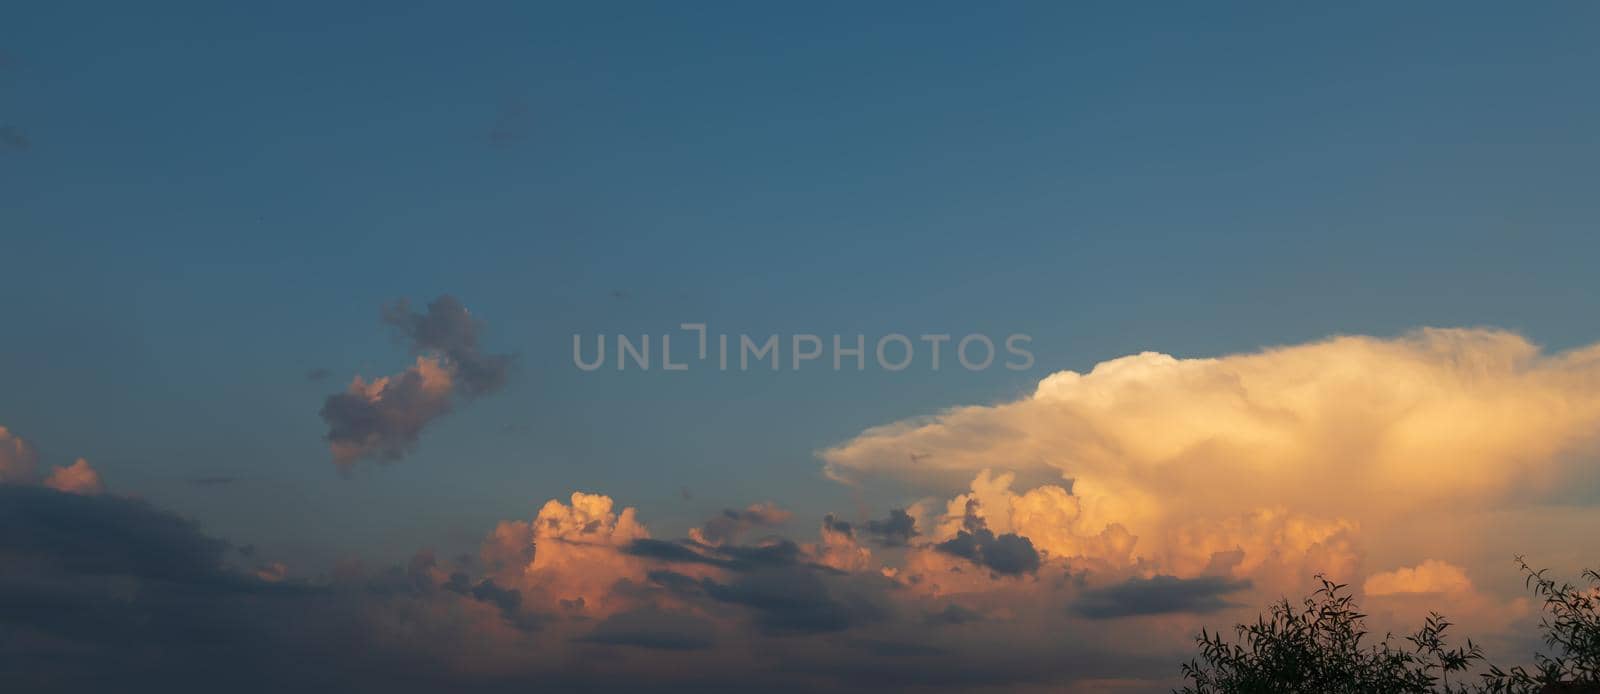 Sunset sky with clouds by palinchak